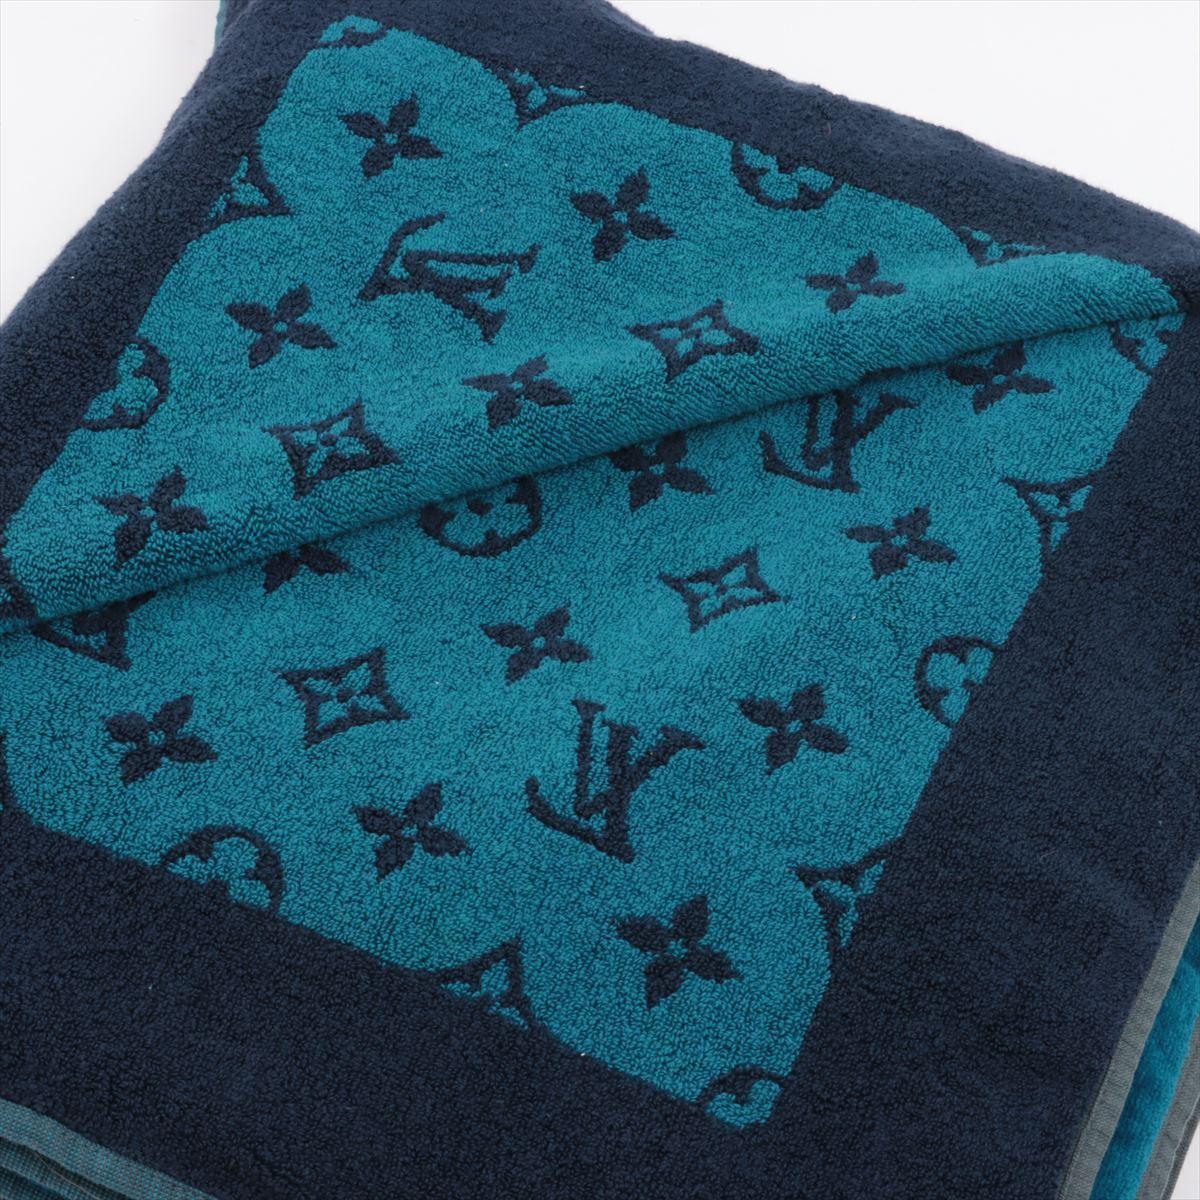 Louis Vuitton Monogram Blanket Navy Blue x Blue Green In Good Condition For Sale In Indianapolis, IN